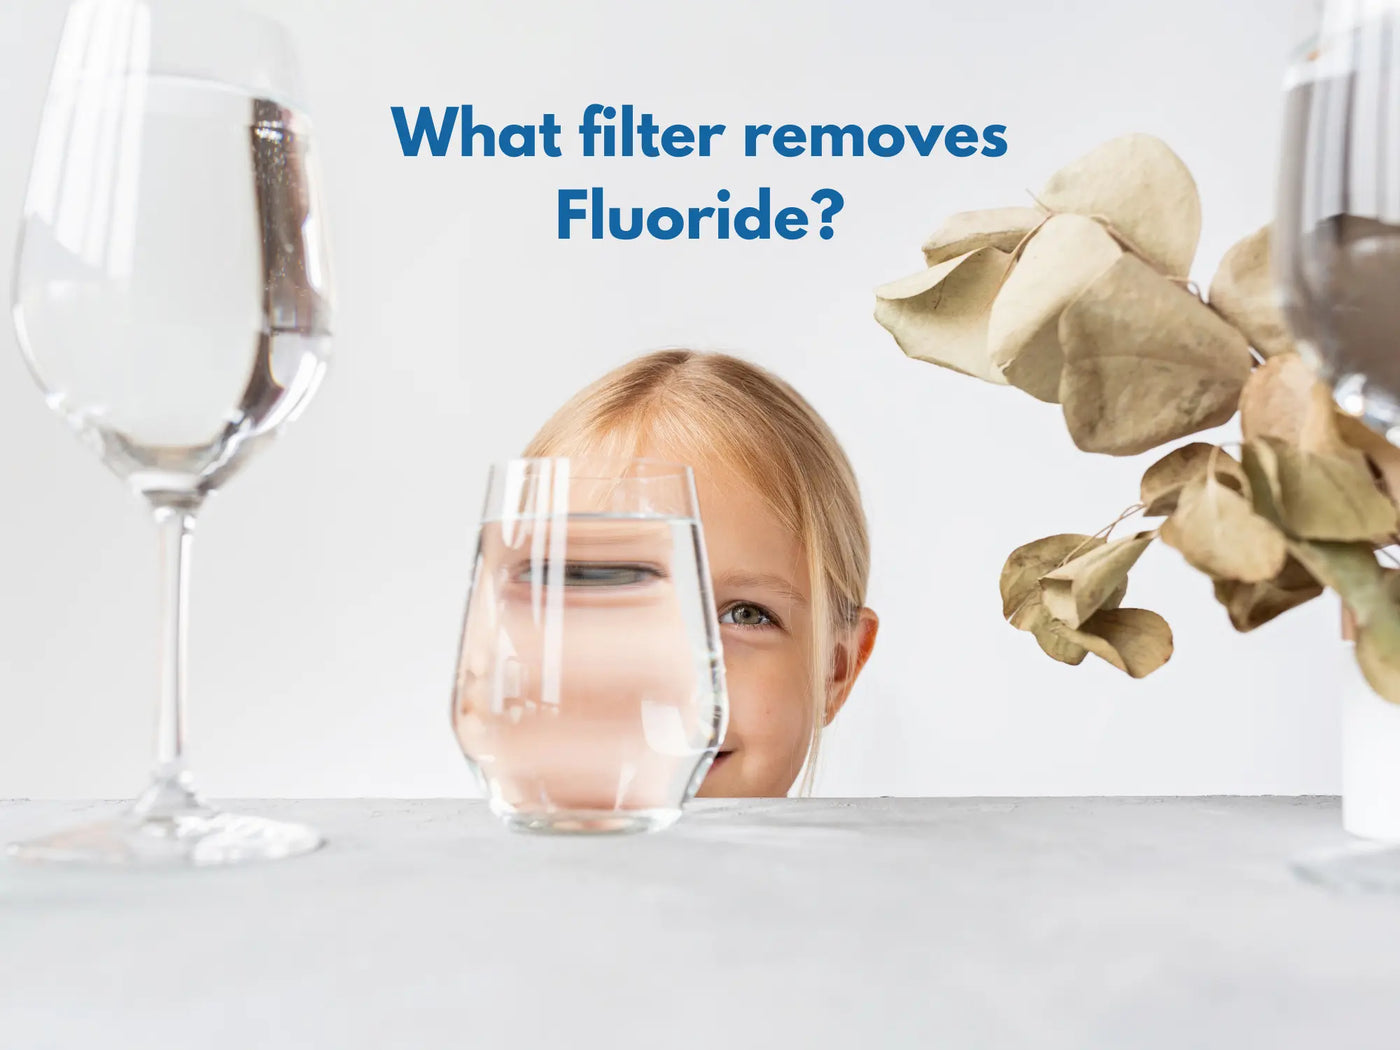 What filter removes Fluoride?